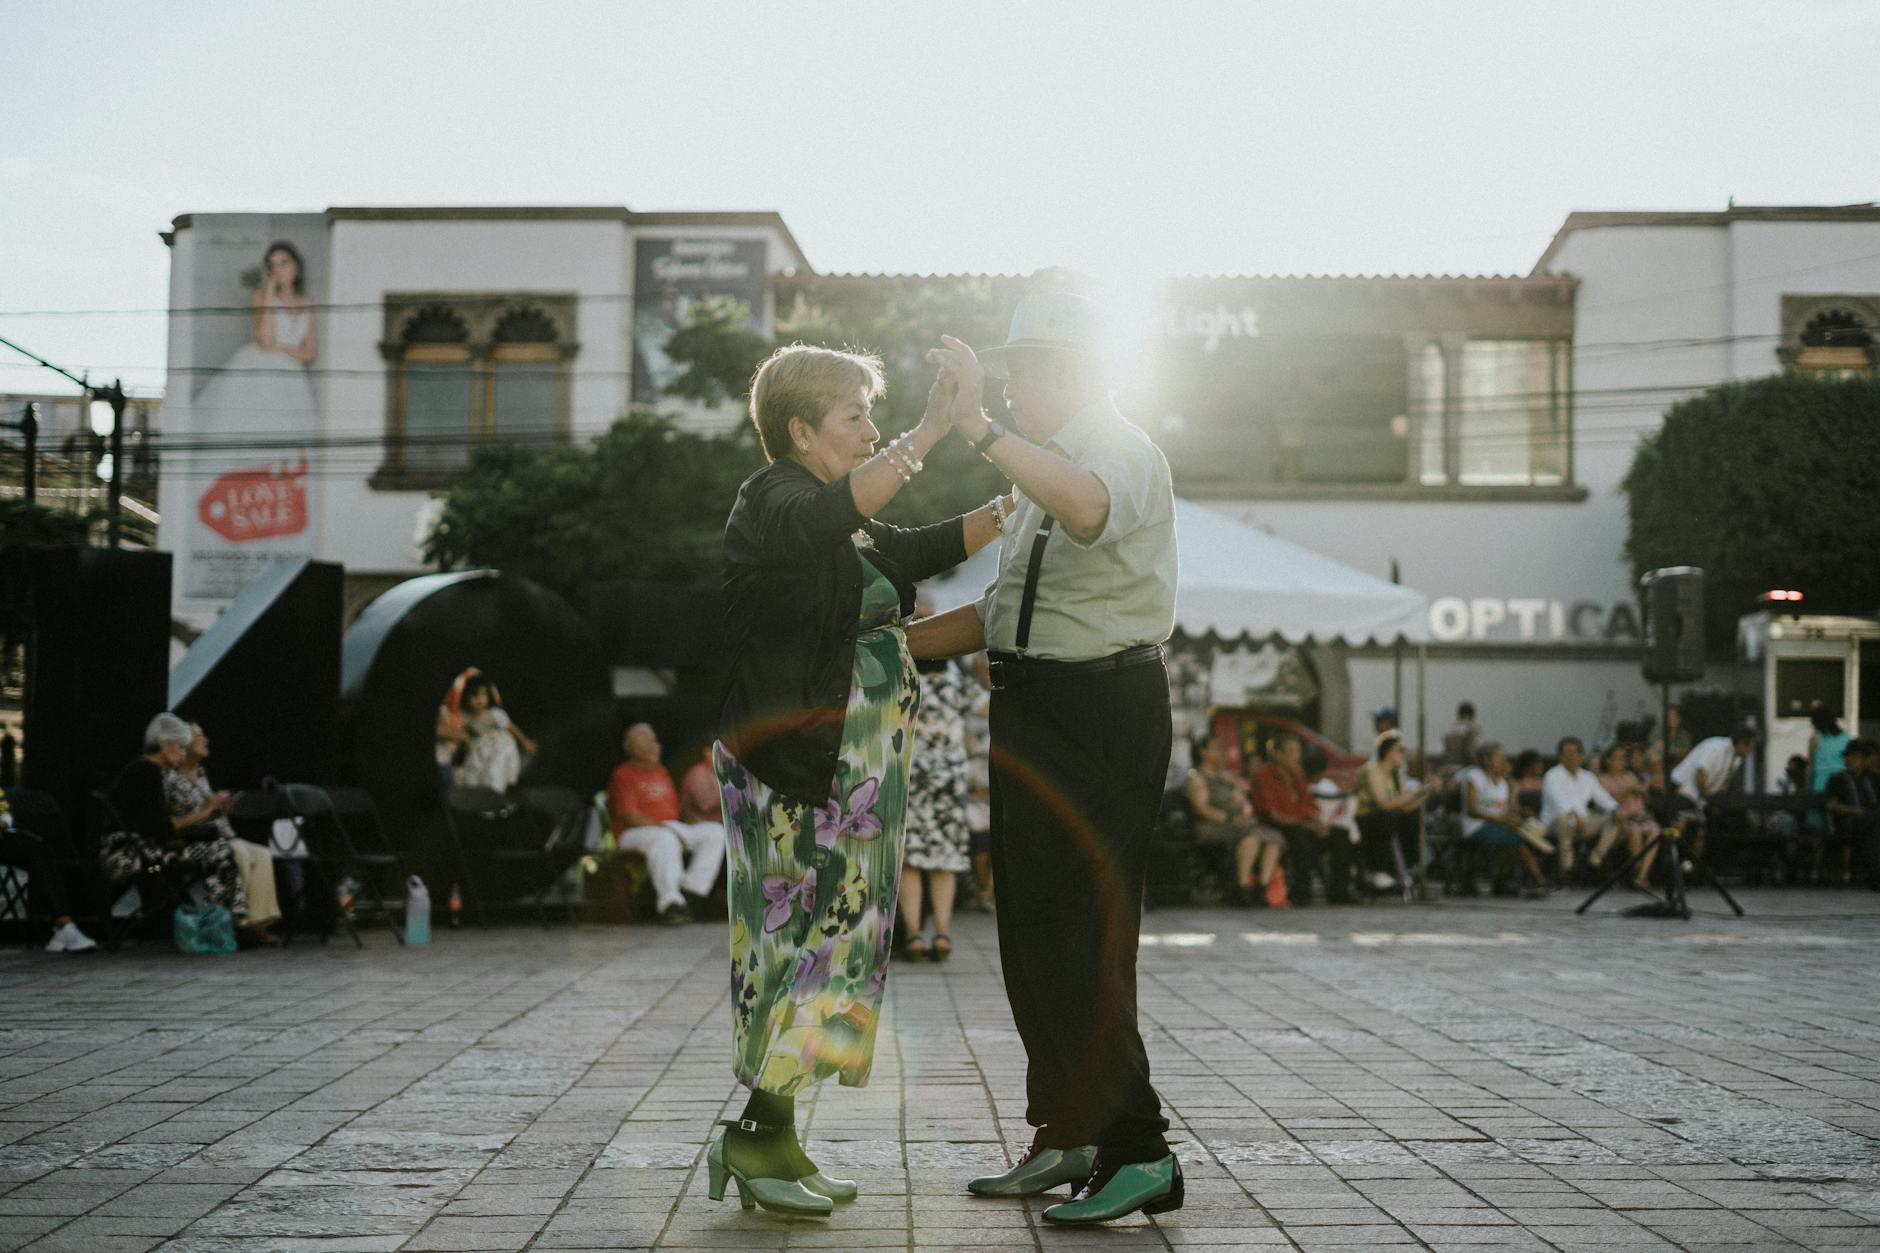 man and woman dancing on square at sunset